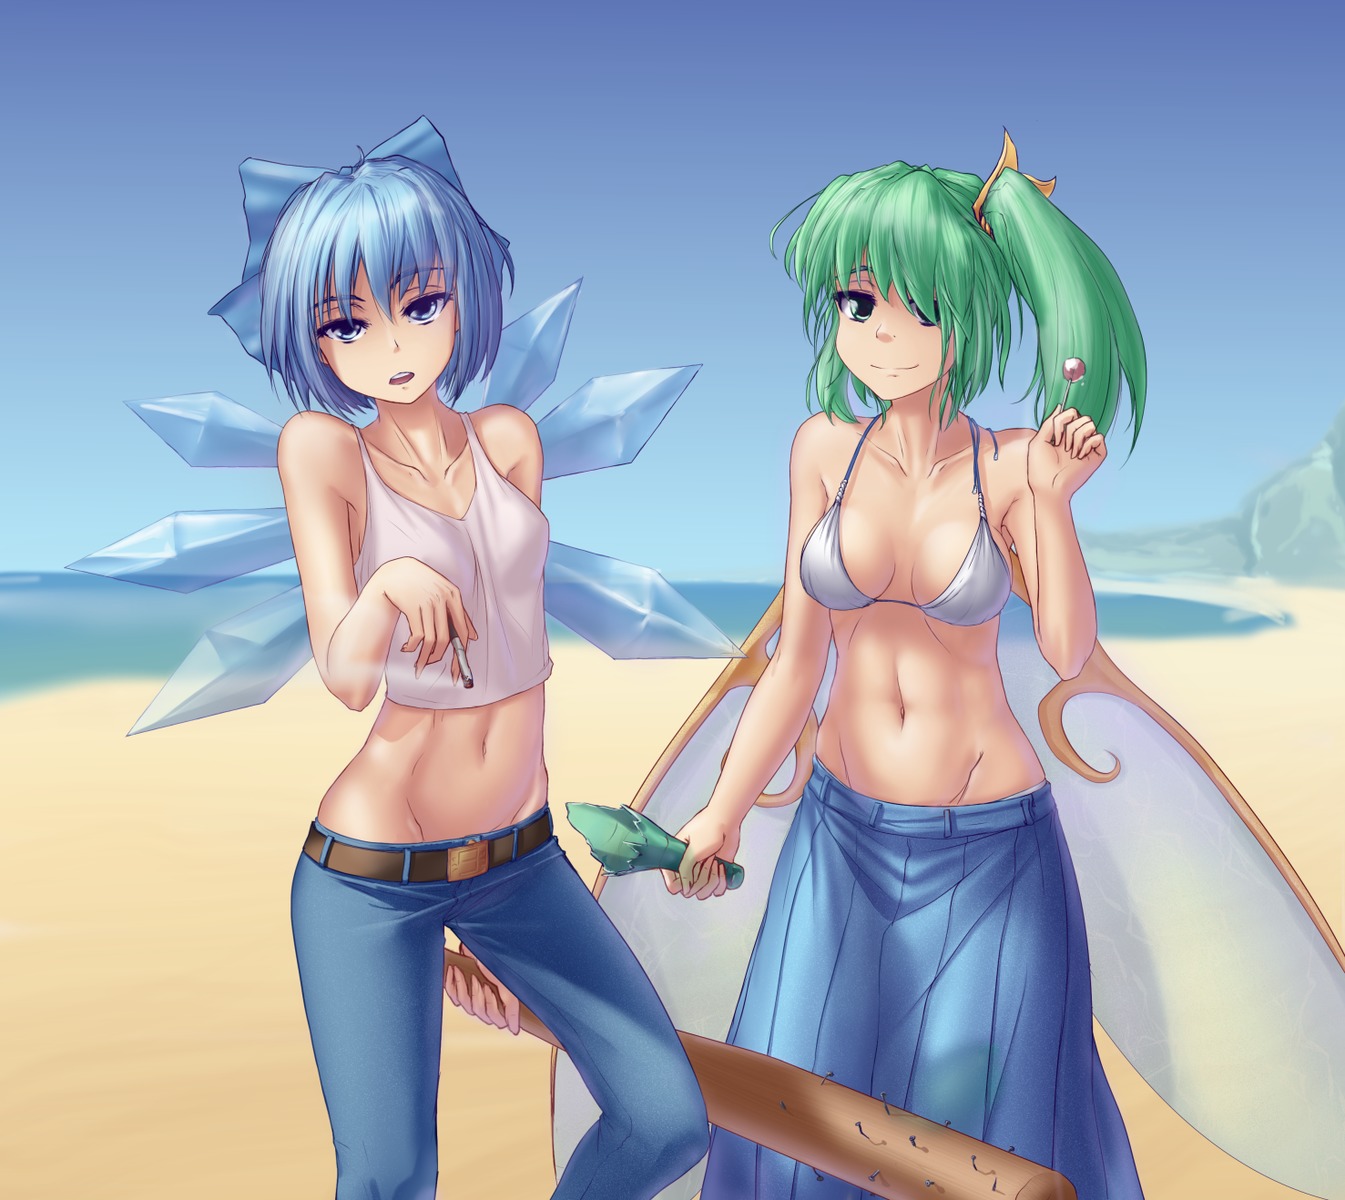 2girls alternate_costume bat beach belt bikini_top blue_eyes blue_hair bottle bow breasts candy cigarette cirno contemporary crop_top daiyousei denim green_eyes green_hair hater_(artist) holding lollipop long_hair midriff multiple_girls navel open_mouth outdoors pants sand short_hair side_ponytail skirt smile tank_top /to/ touhou weapon wings